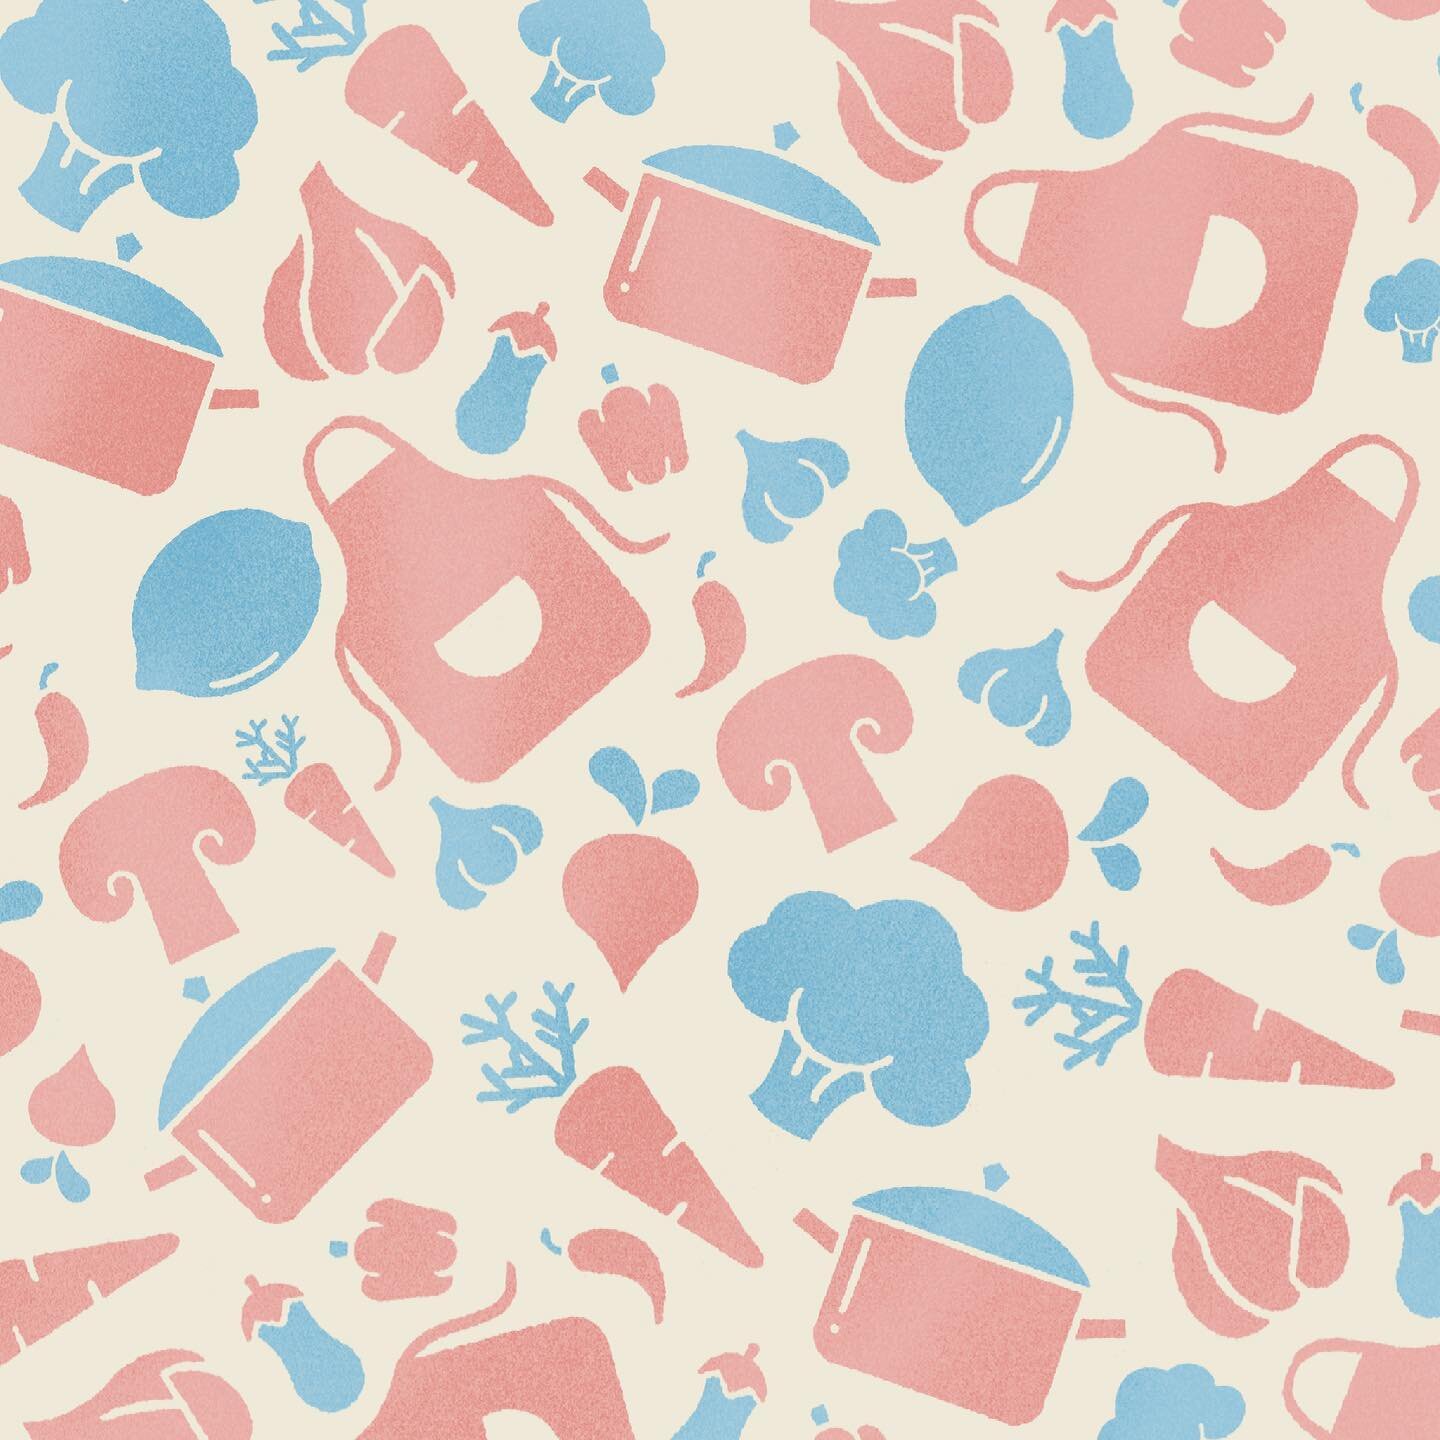 Fun kitchen pattern
Part of a killed project I did for Gallery Media Group. 
#illustration #procreate